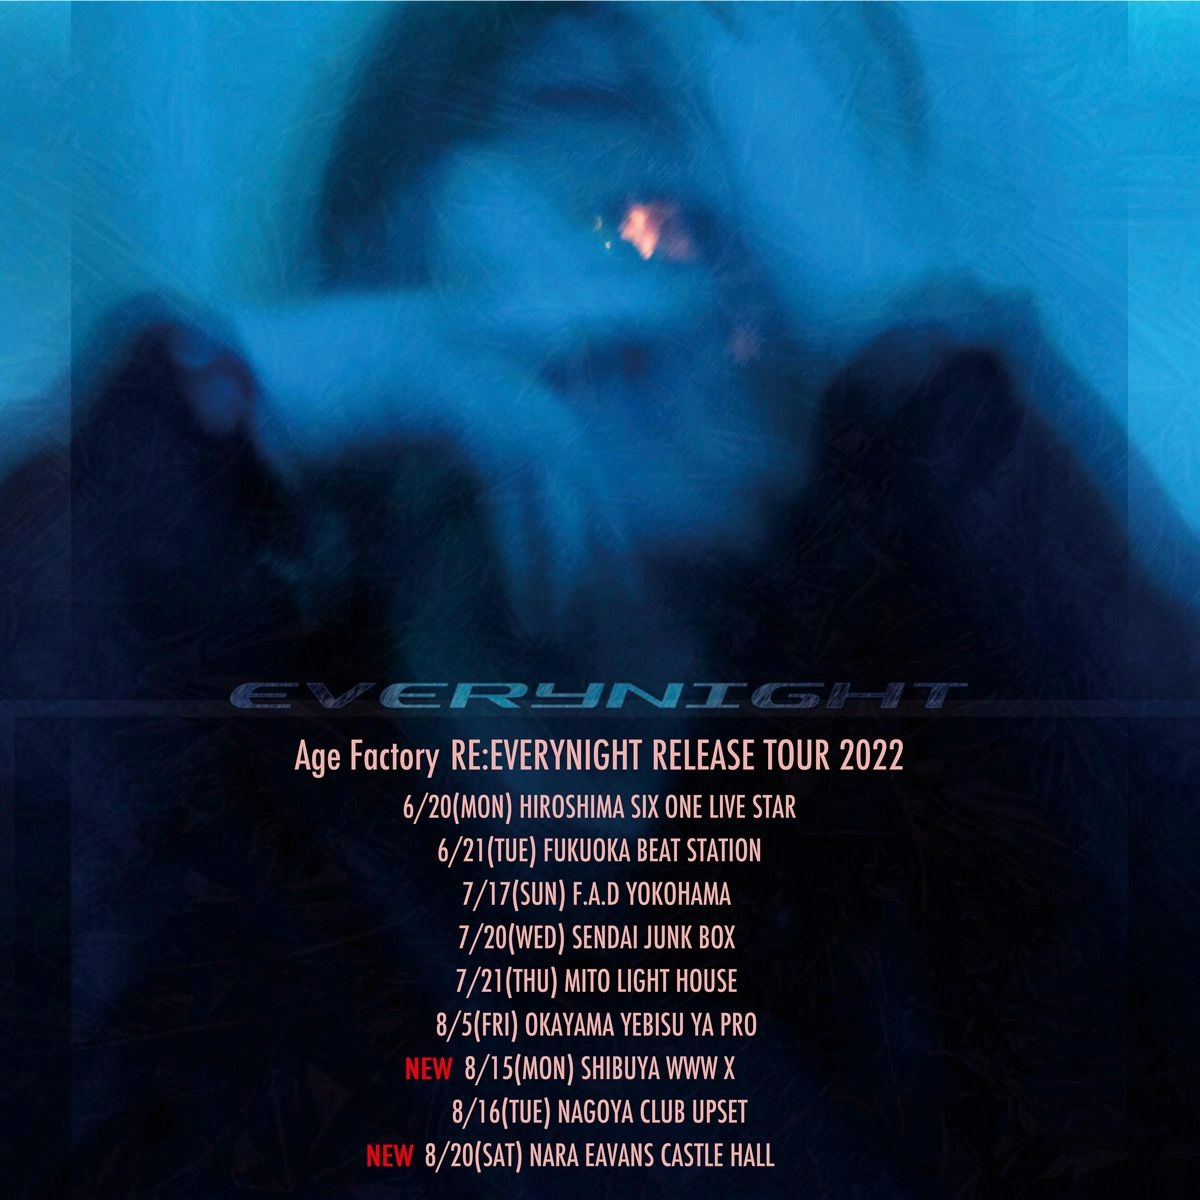 Age Factory RE:EVERYNIGHT RELEASE TOUR 2022